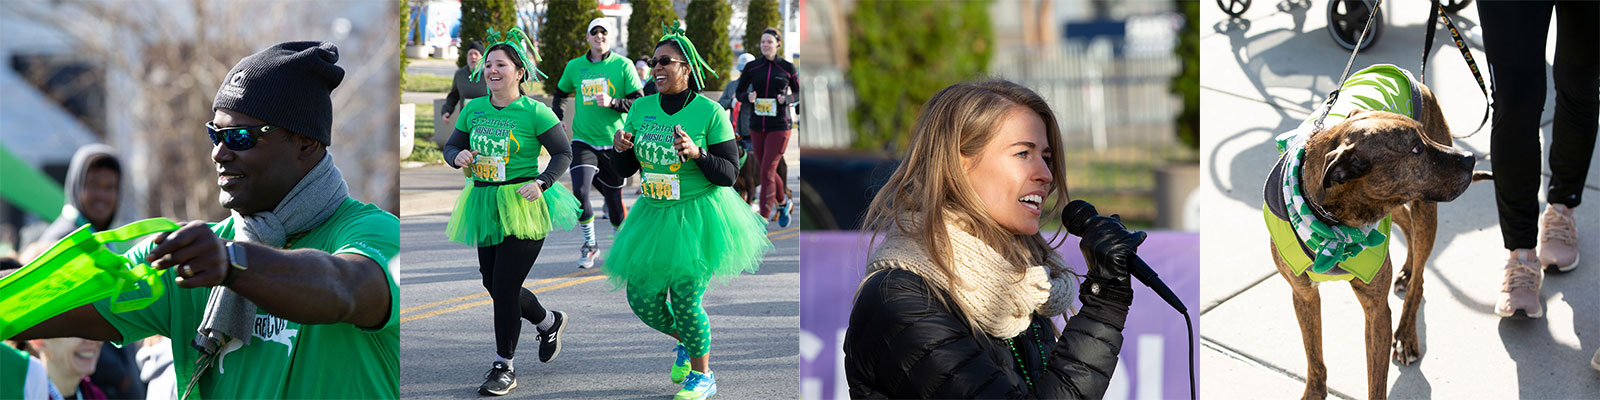 4 photos from the race, of people running and speaking